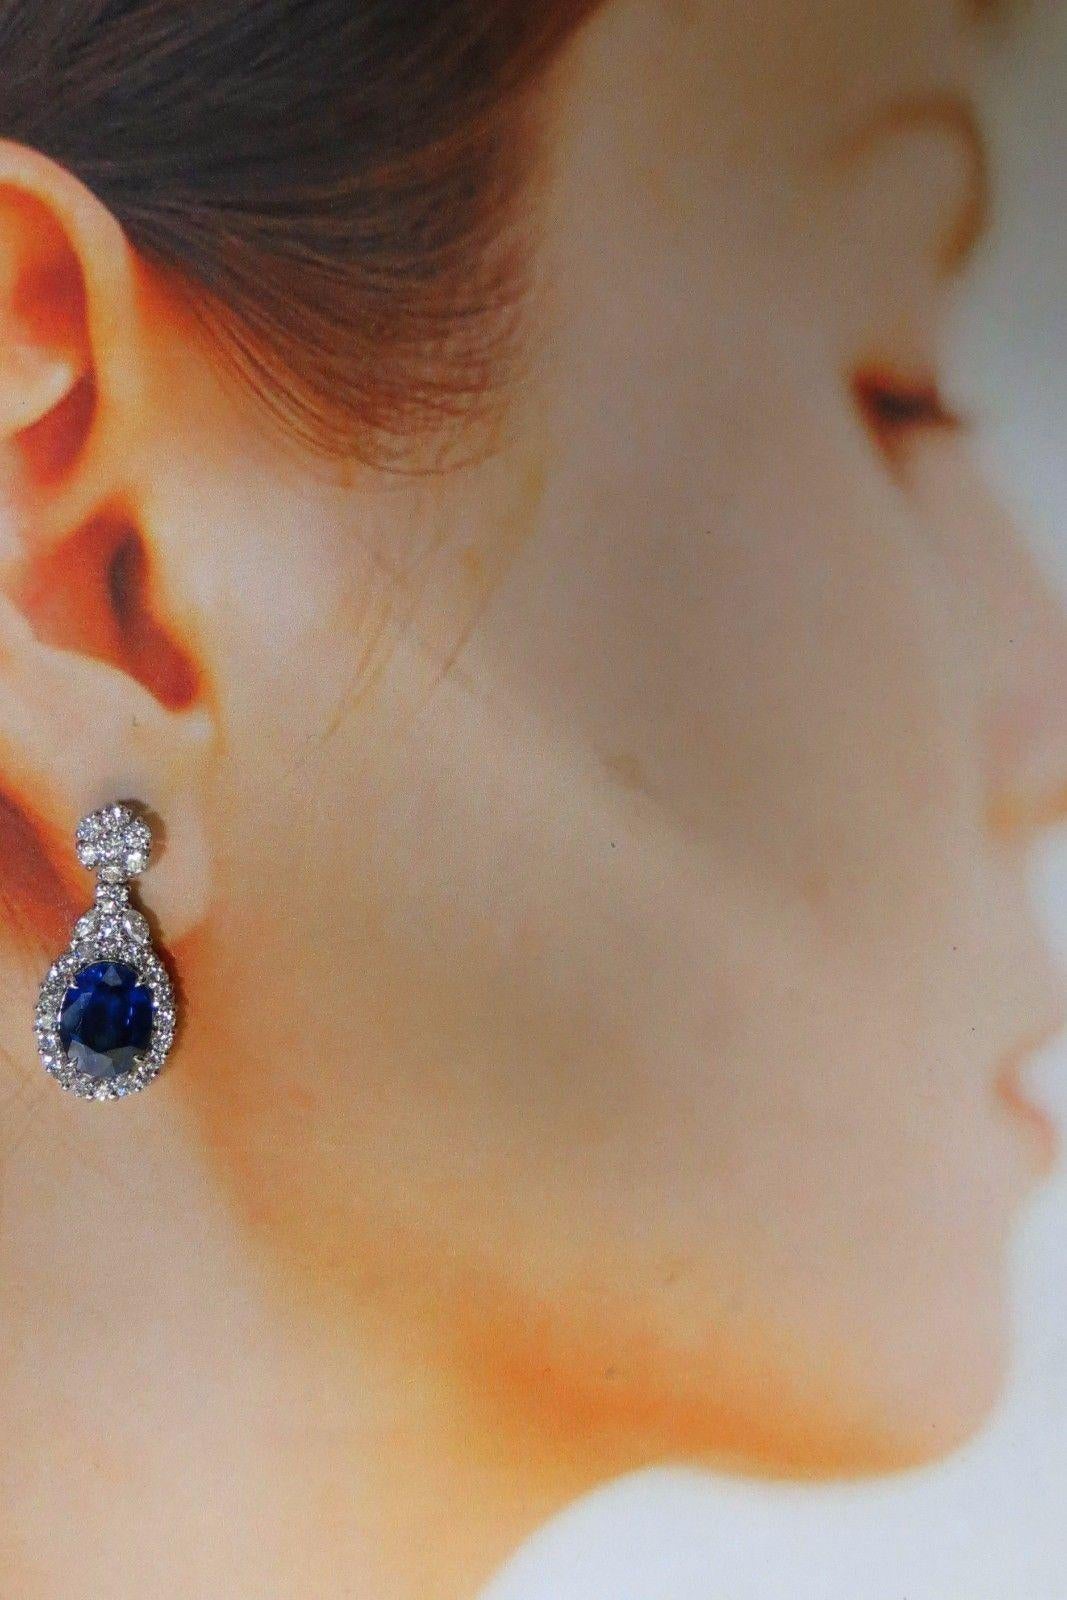 Cluster Drop Dangle Earrings.

16.00ct. Created Lab Sapphires

 Oval shaped, Full Cut.

Transparent & Fine Royal Blue tone.

11 X 9mm each sapphire.



3.00cts of natural round & marquise diamonds: 

G-color, Vs-2 clarity.

14kt. white gold

9